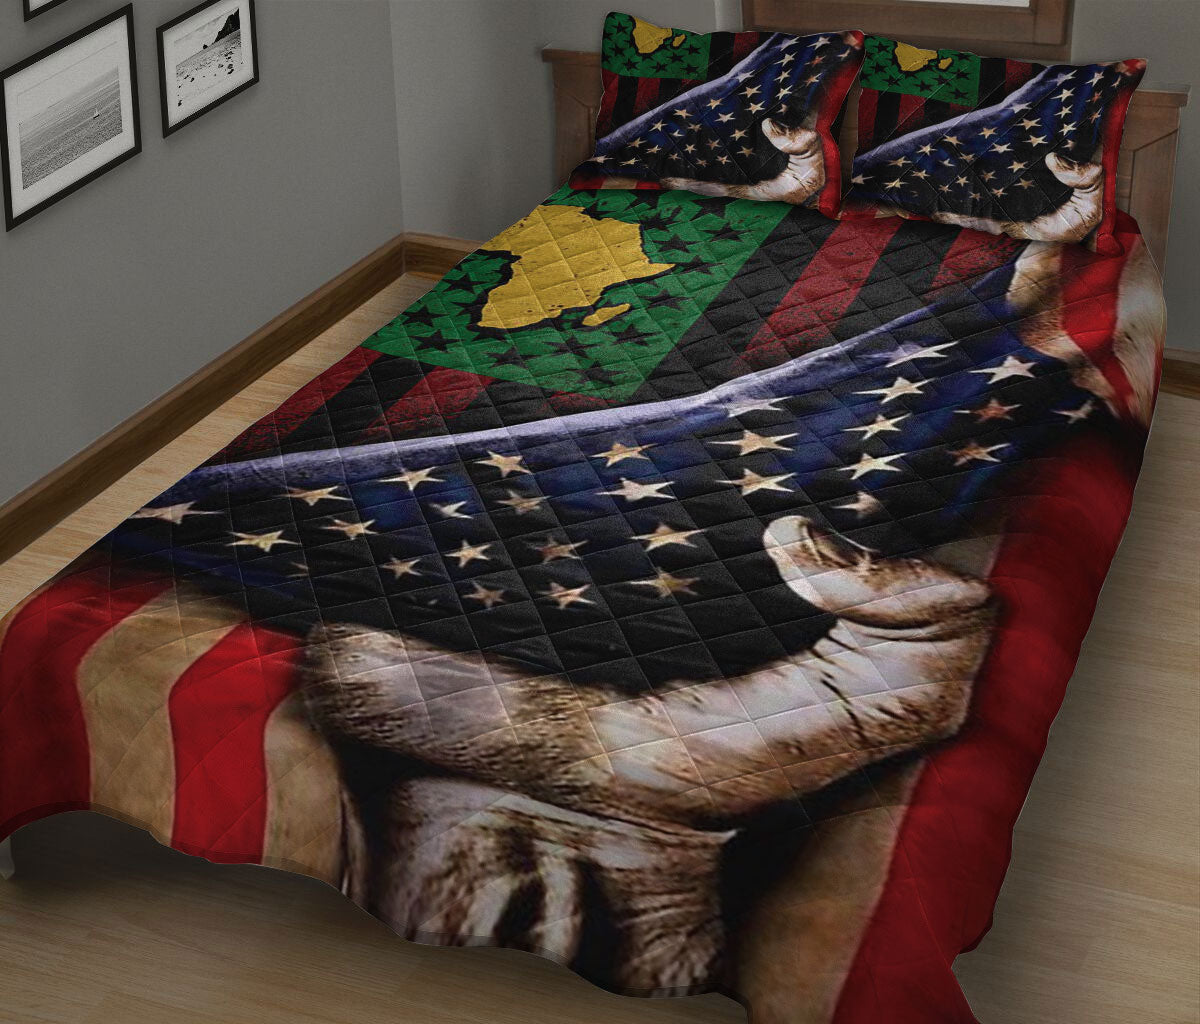 Ohaprints-Quilt-Bed-Set-Pillowcase-African-Map-Afro-American-Juneteenth-June-19Th-1865-Independence-Day-Freedom-Blanket-Bedspread-Bedding-2585-King (90'' x 100'')